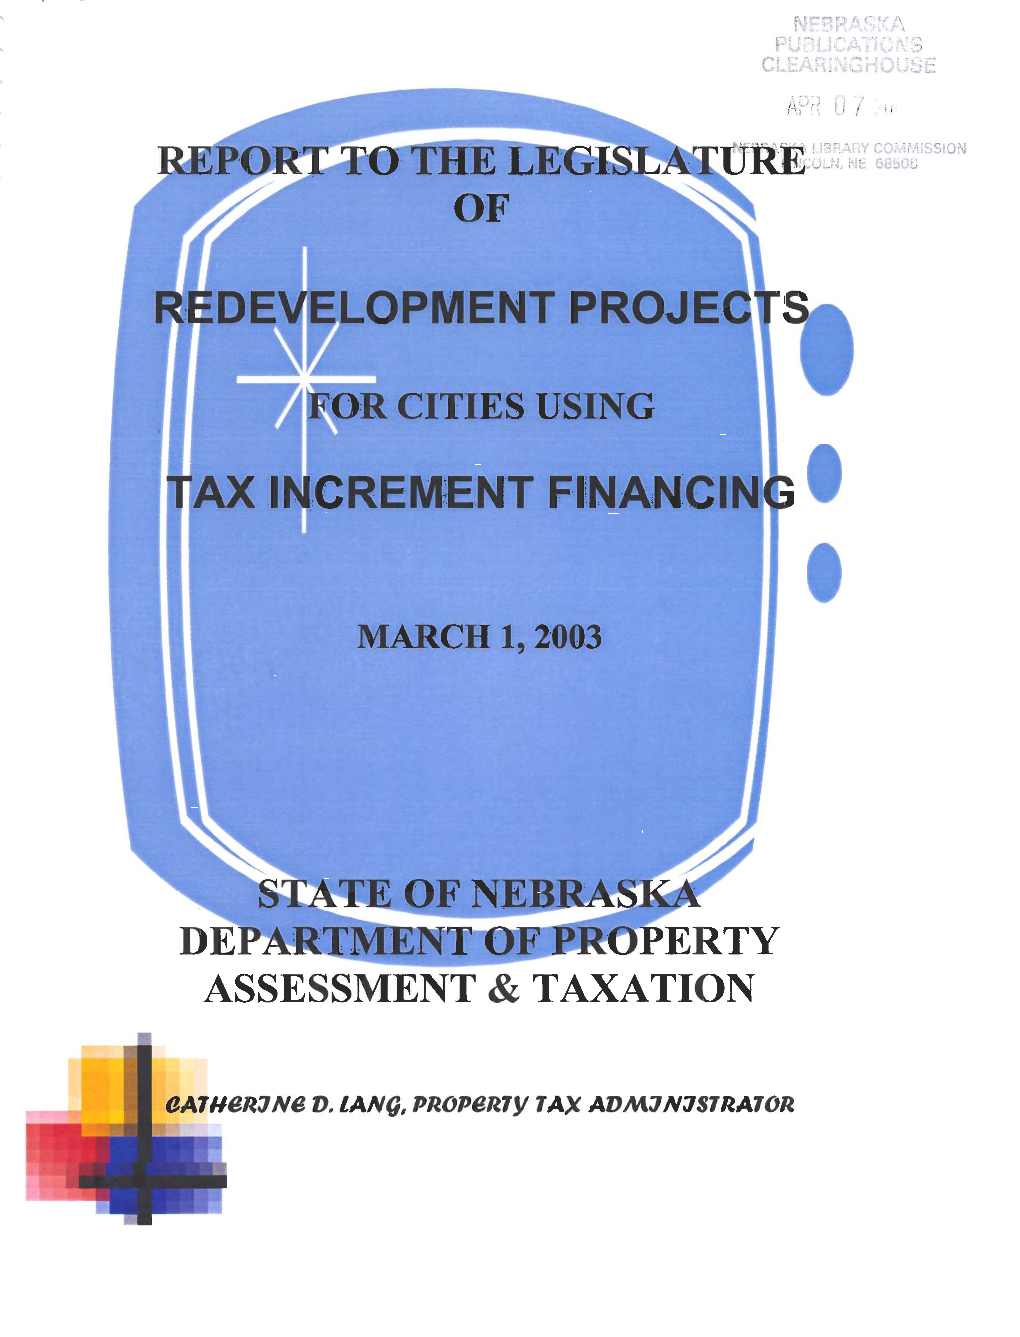 Redevelopment Projects for Cities Using Tax Increment Financing, 2003